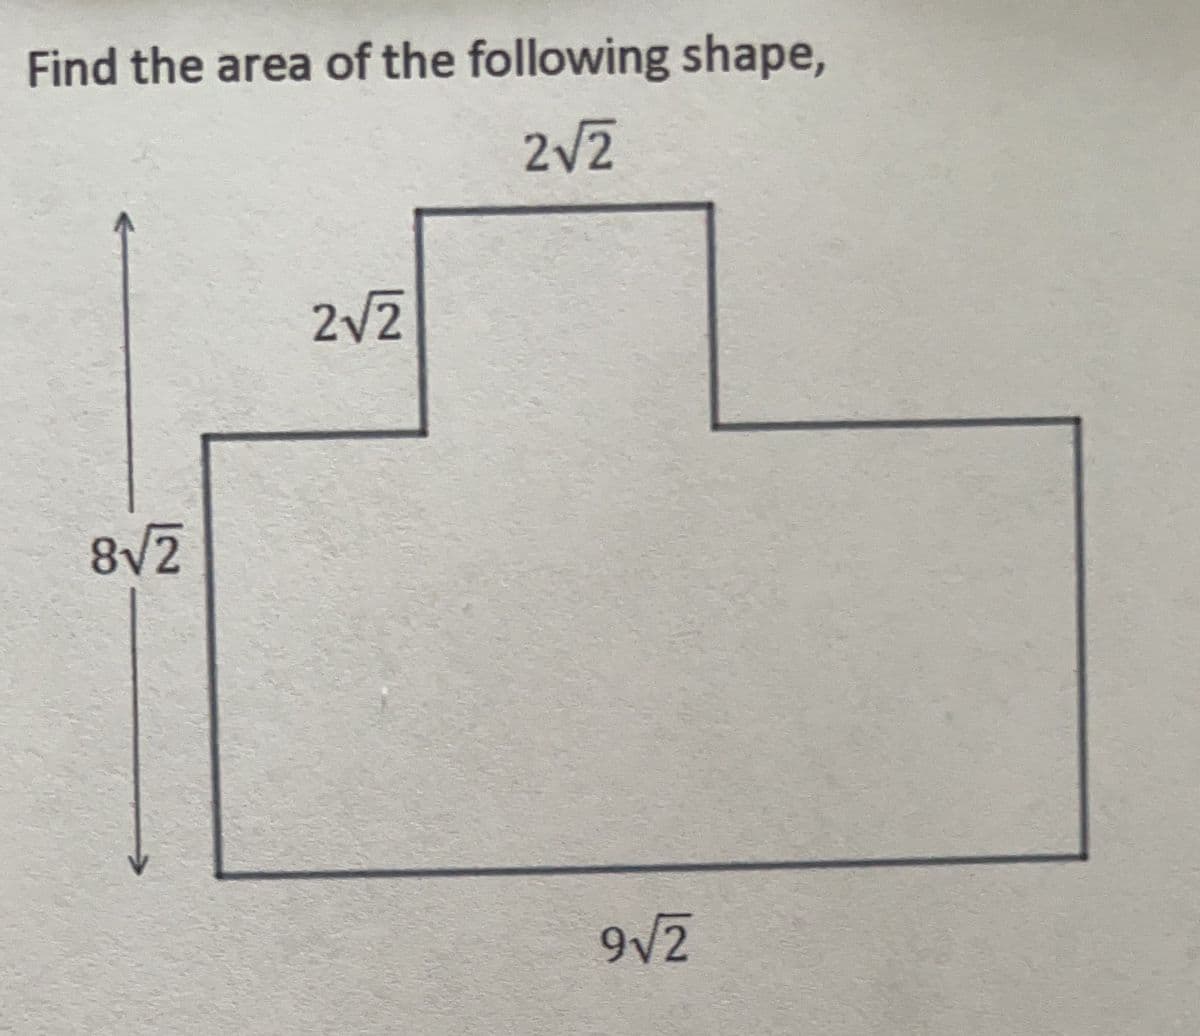 Find the area of the following shape,
2/2
2v2
8V2
9V2
